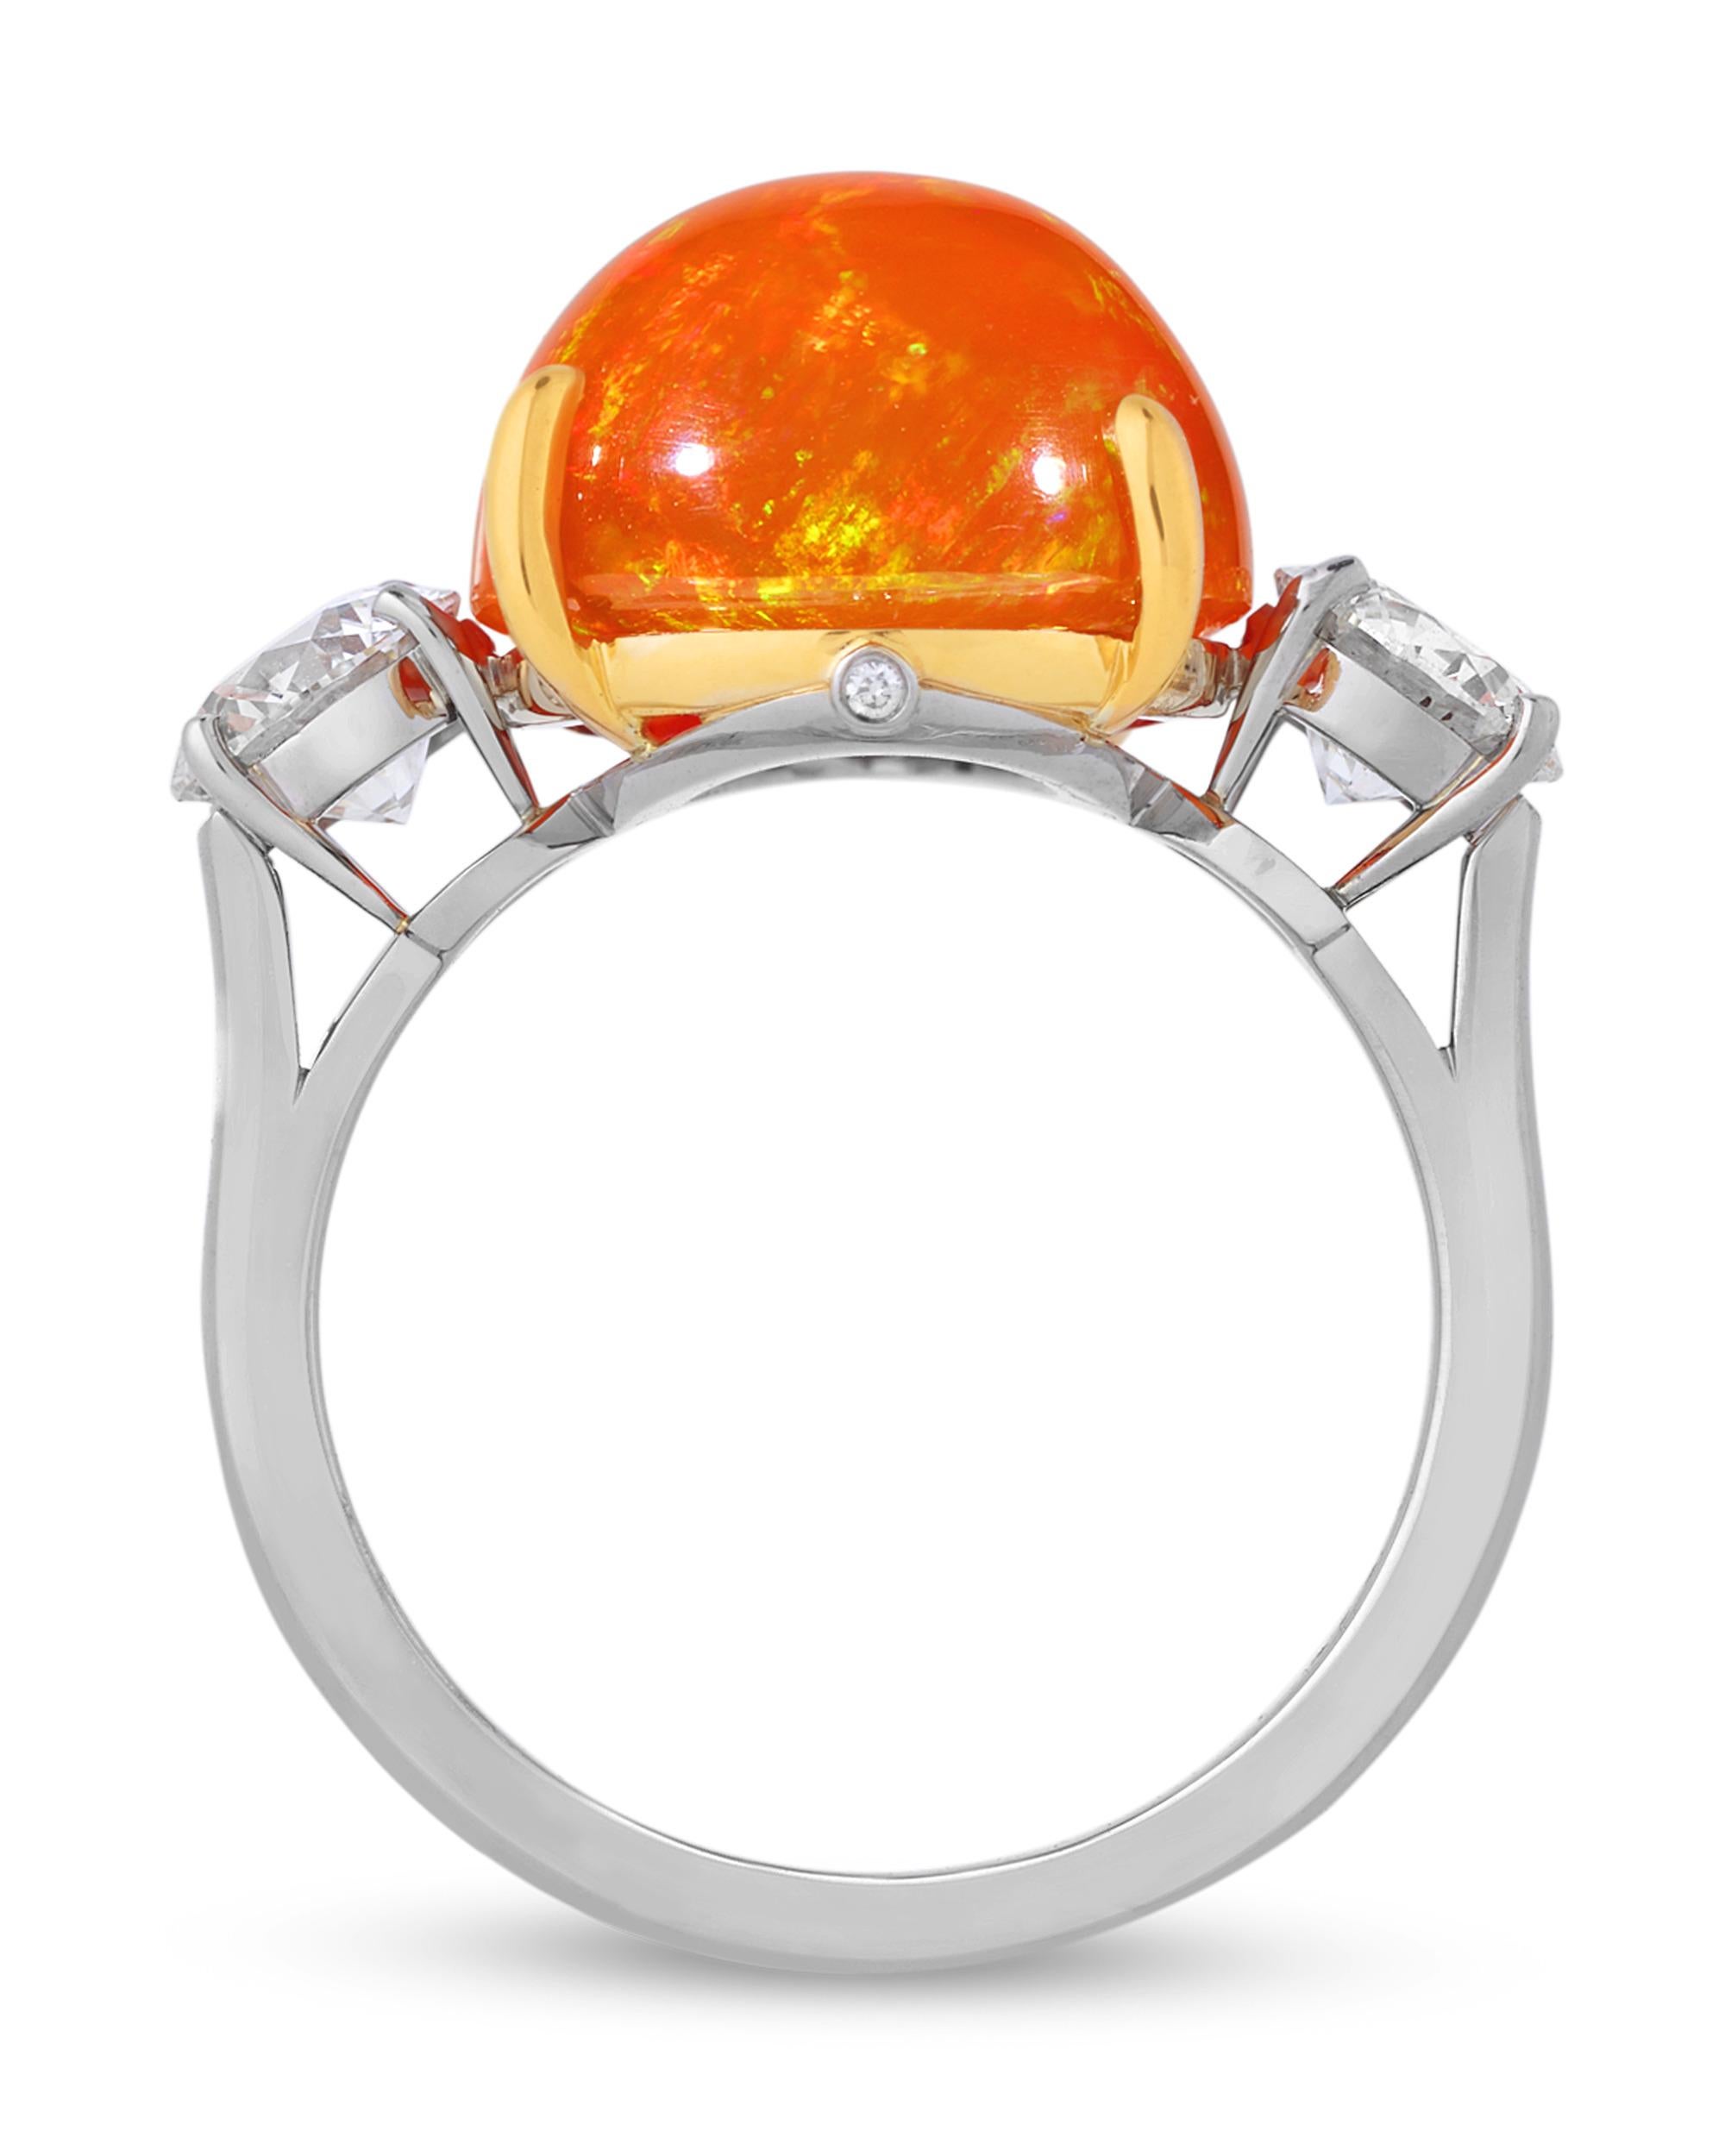 A stunning display of one of the most coveted marvels of nature, this ring by Oscar Heyman centers an exquisite vivid Mexican fire opal. The incredible 7.79-carat cabochon gem is certified by the Deutsche Stiftung Edelsteinforschung (DSEF) German